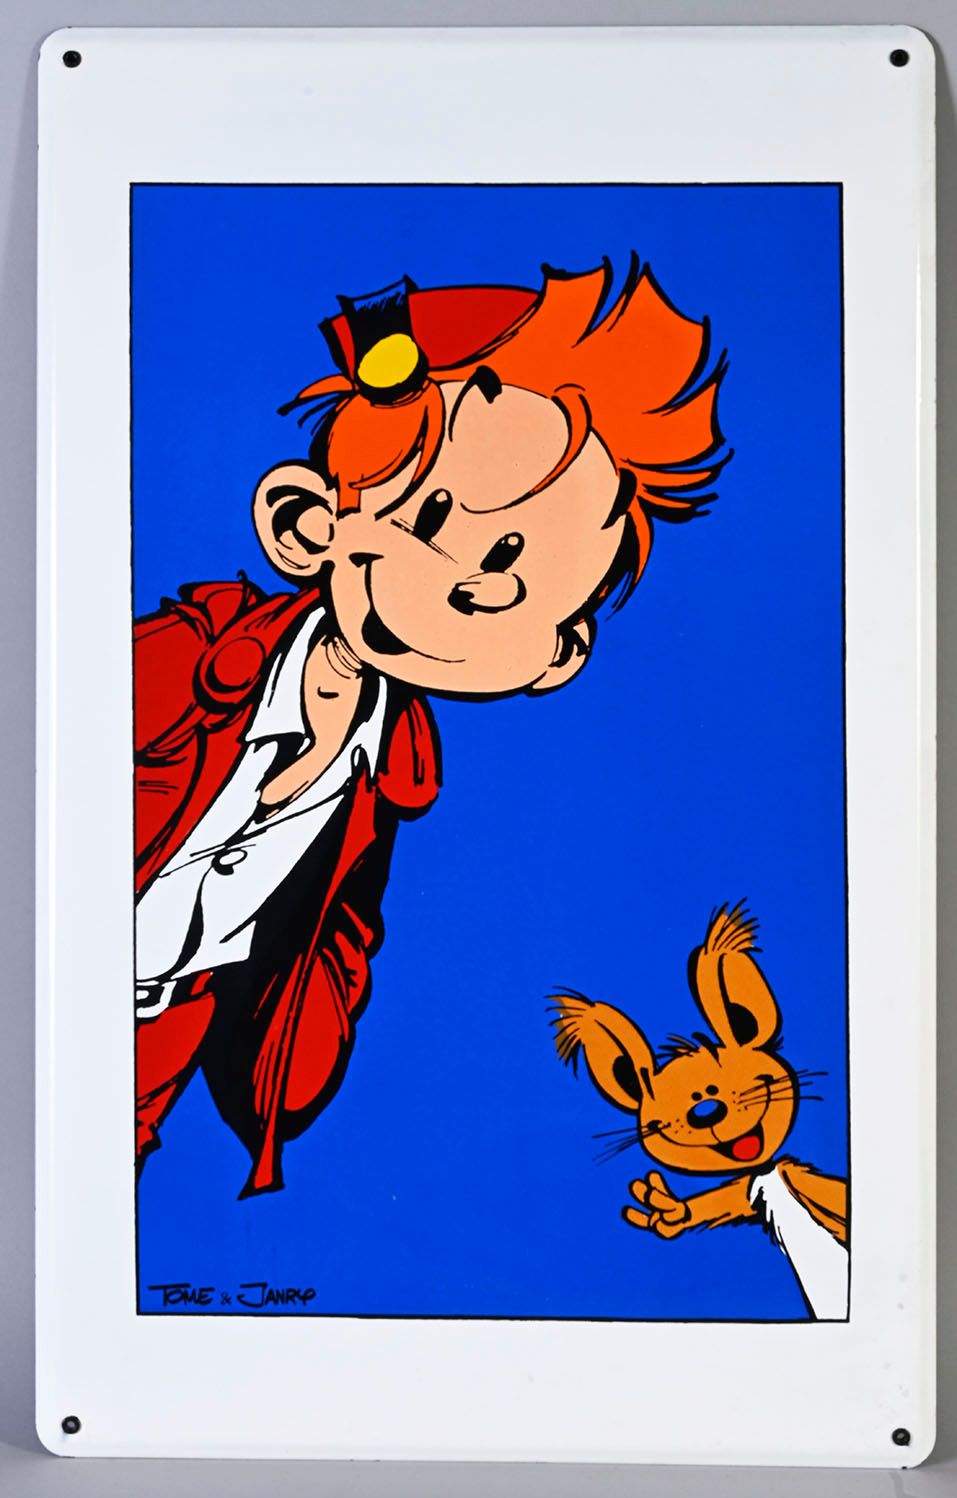 TOME&JANRY SPIROU AND SPIP,
ENAMELED PLATE. Edited in 1995 by the editions l'Age&hellip;